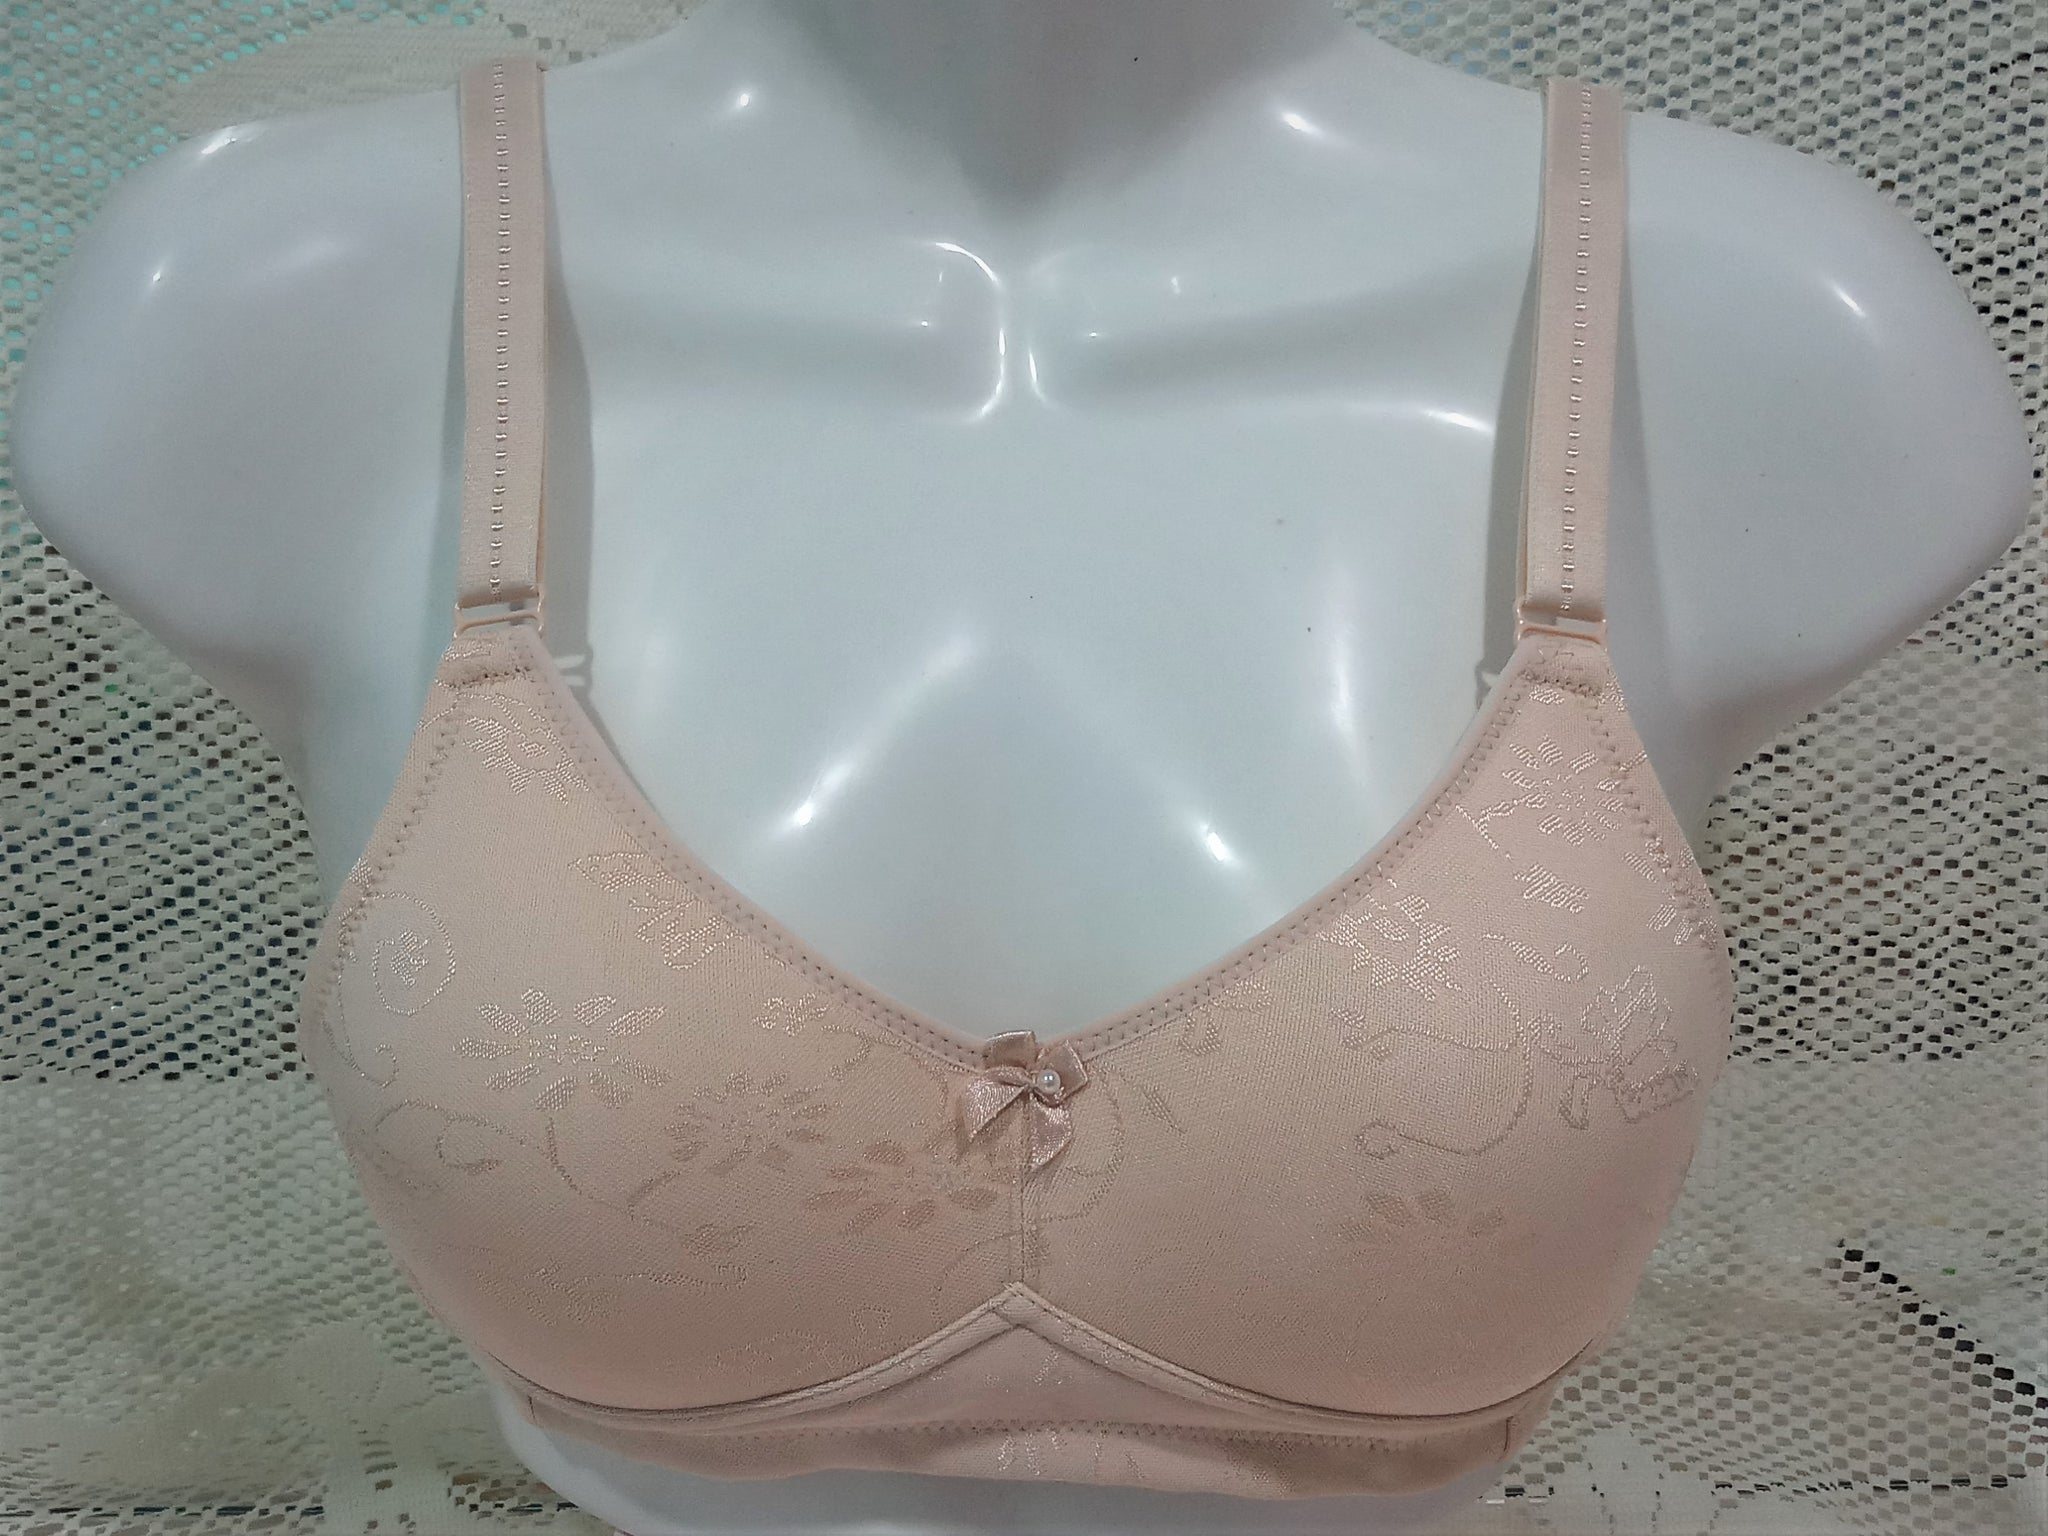 Can-Care Jaisy Mastectomy Bra (LIMITED SIZES) – Can-Care: Your